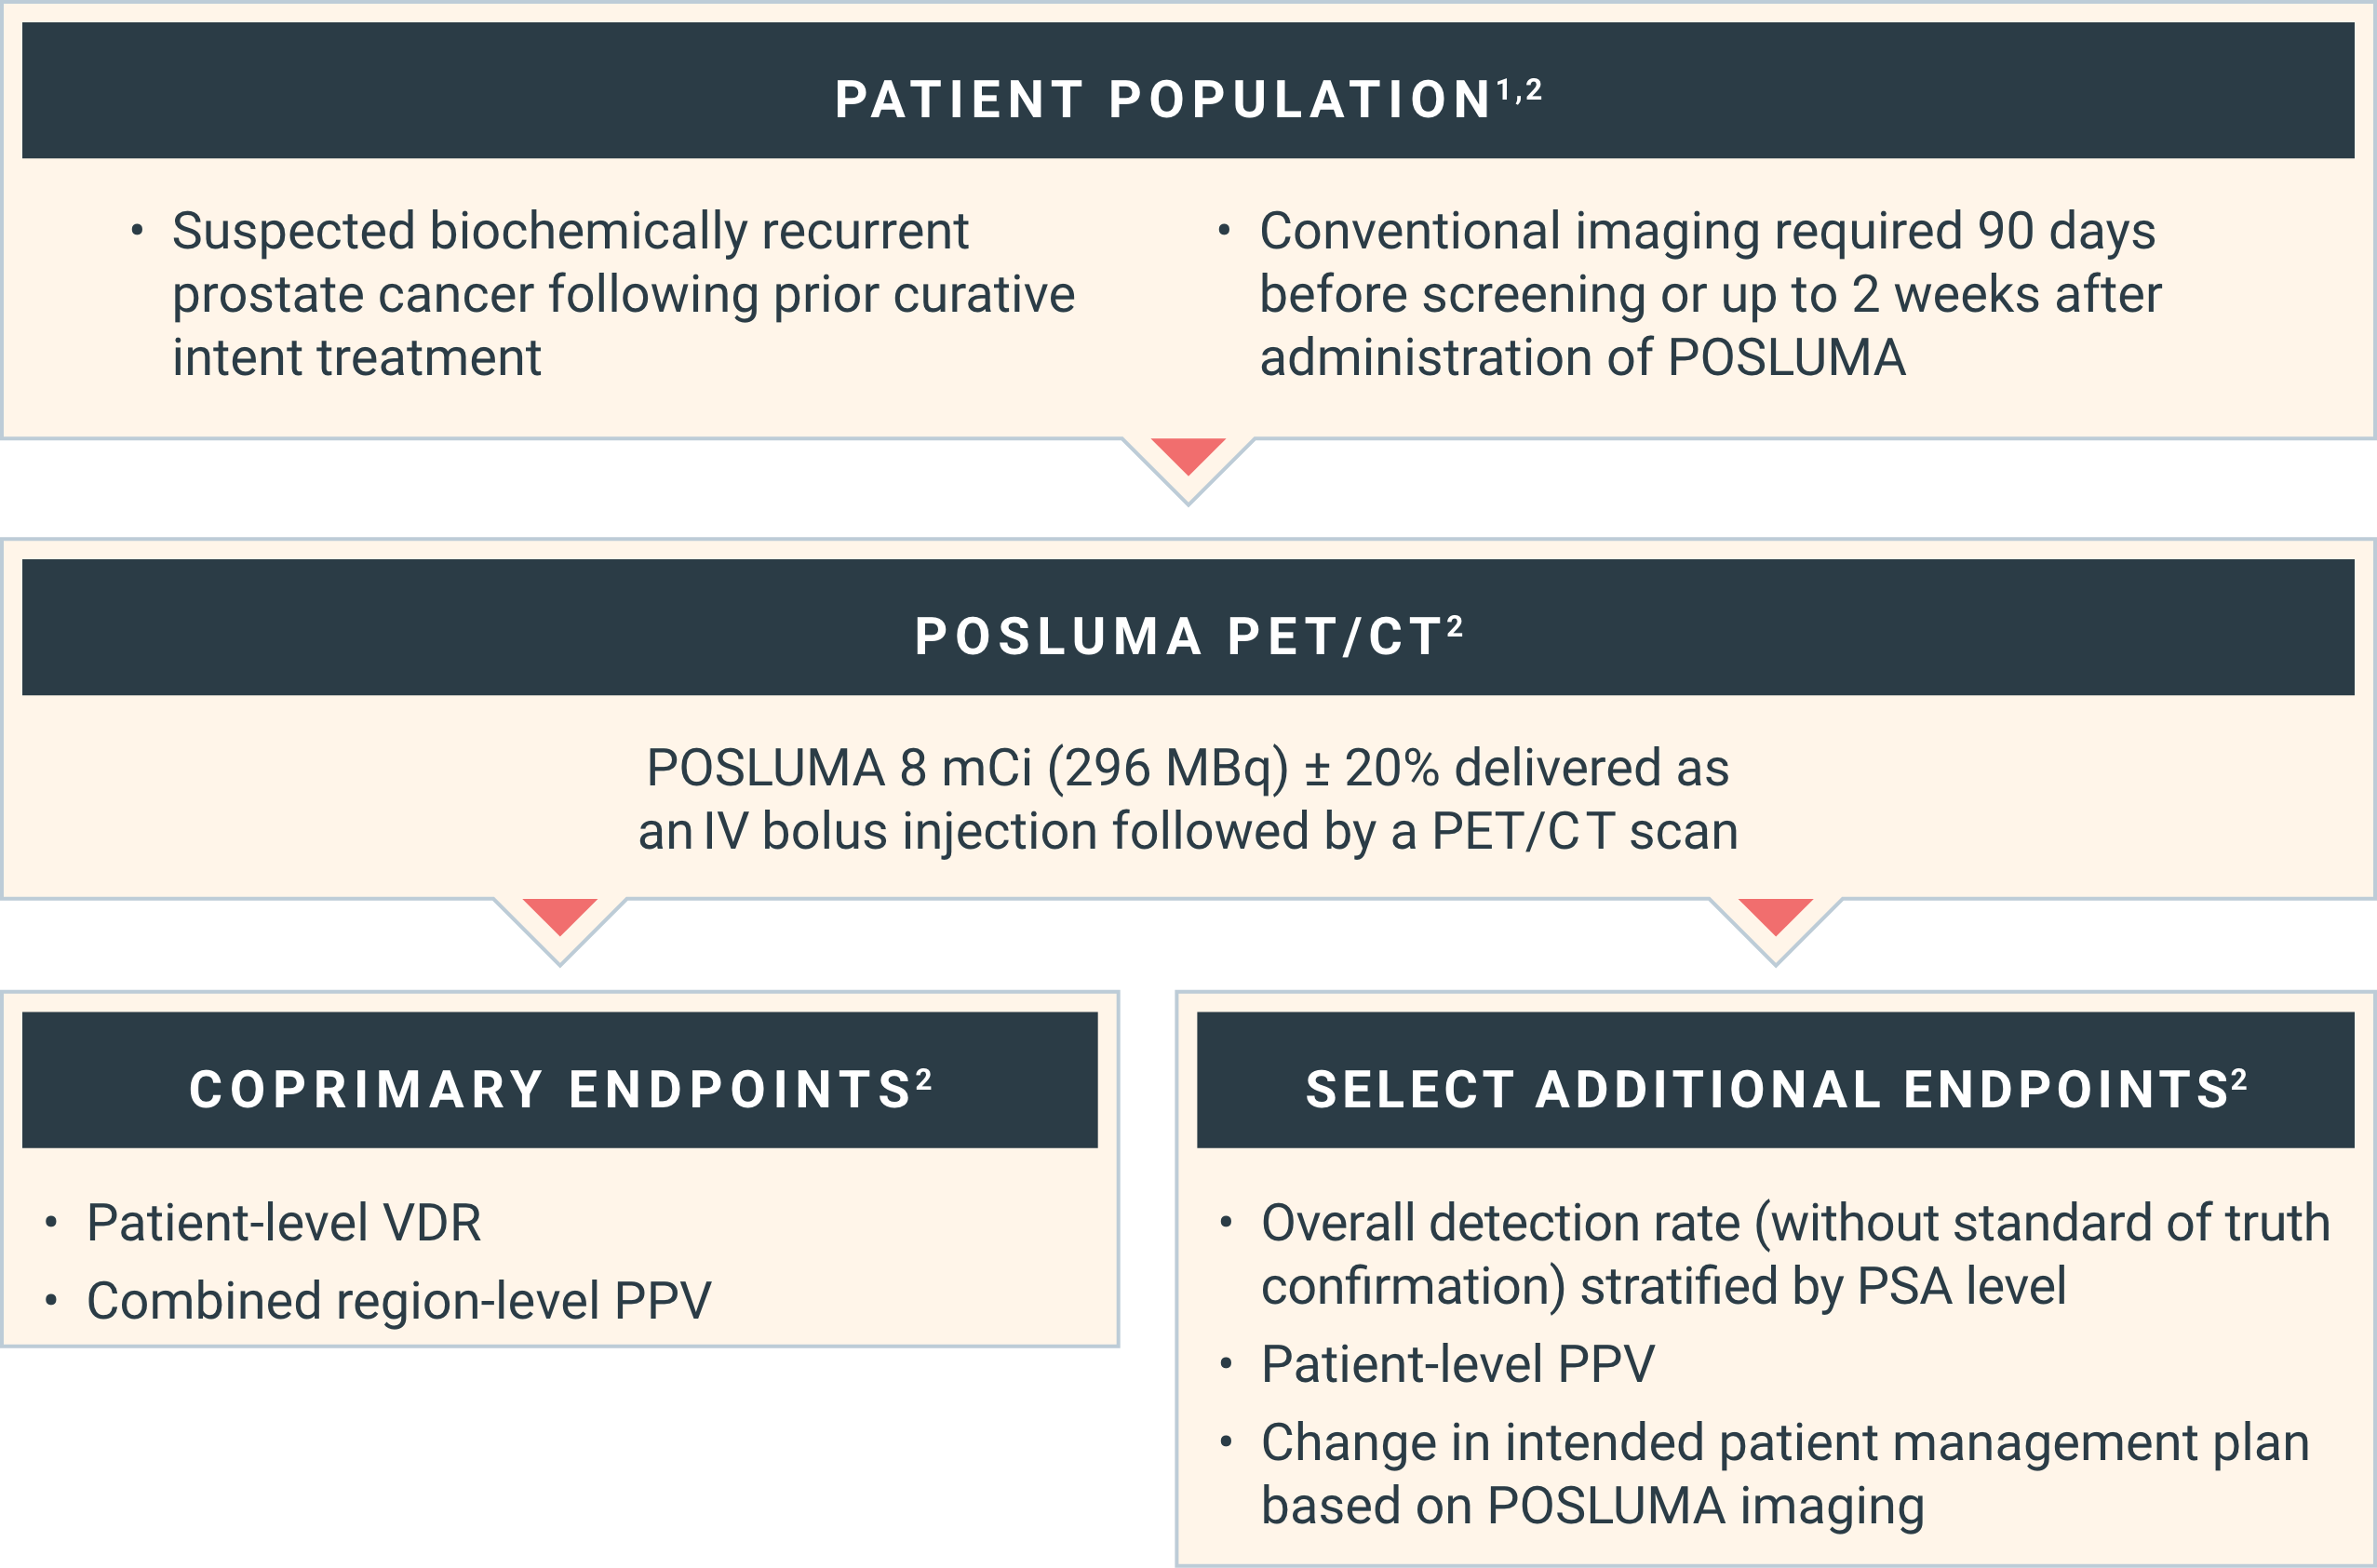 Chart describing the patient population for the LIGHTHOUSE study, as well as explaining the POSLUMA PET/CT scans and listing the coprimary endpoints and select additional endpoints